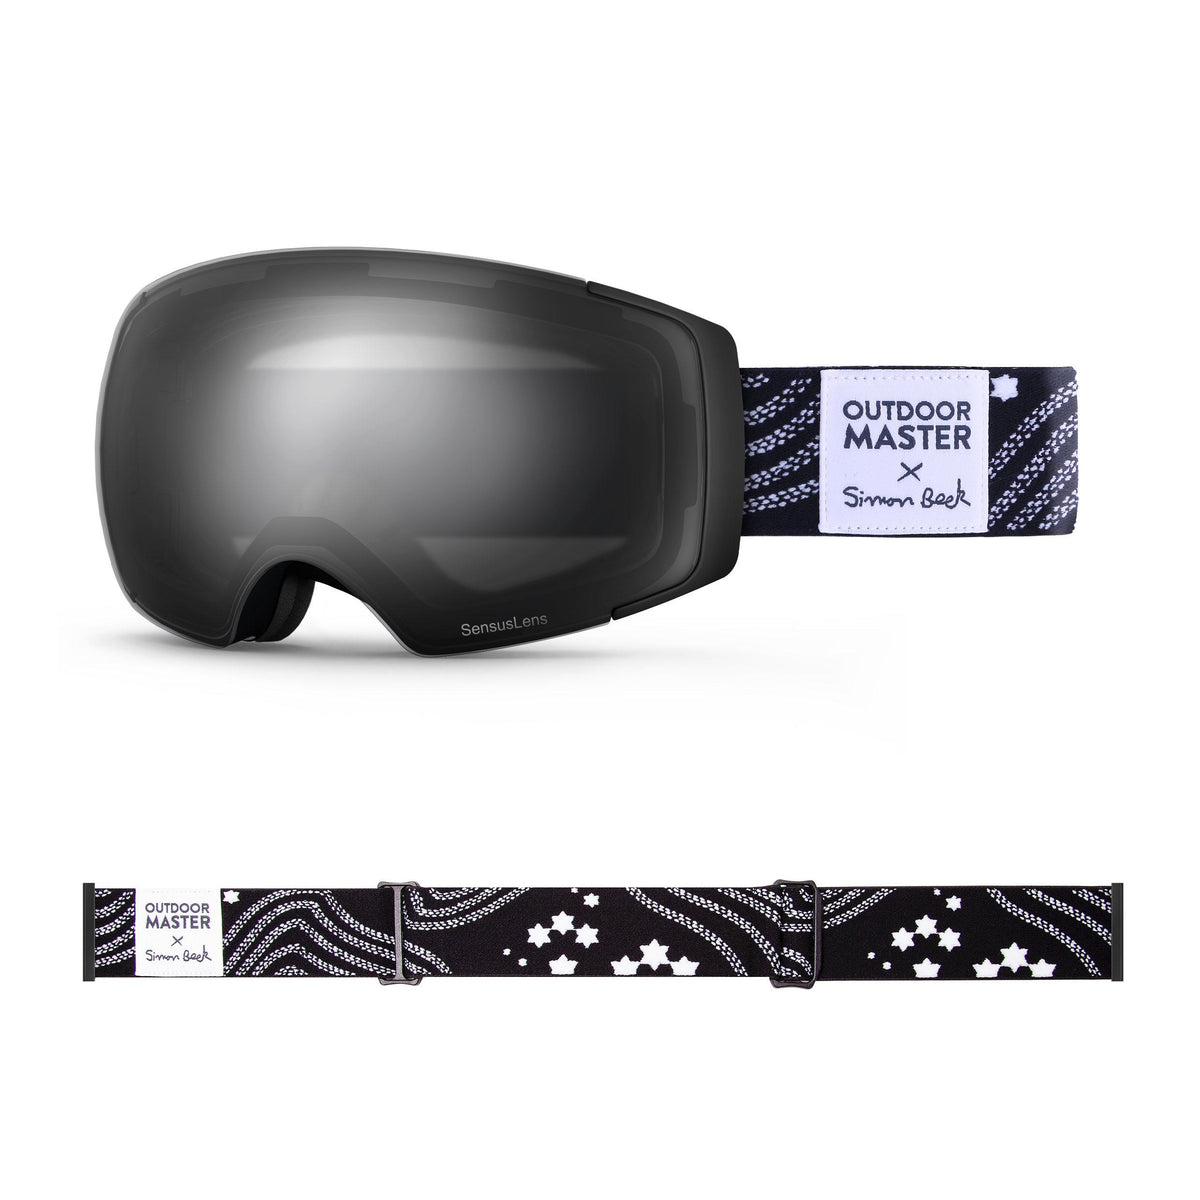 OutdoorMaster x Simon Beck Ski Goggles Pro Series - Snowshoeing Art Limited Edition OutdoorMaster SensusLens VLT 16-80% Photochromatic clear to Grey Star Road-Black